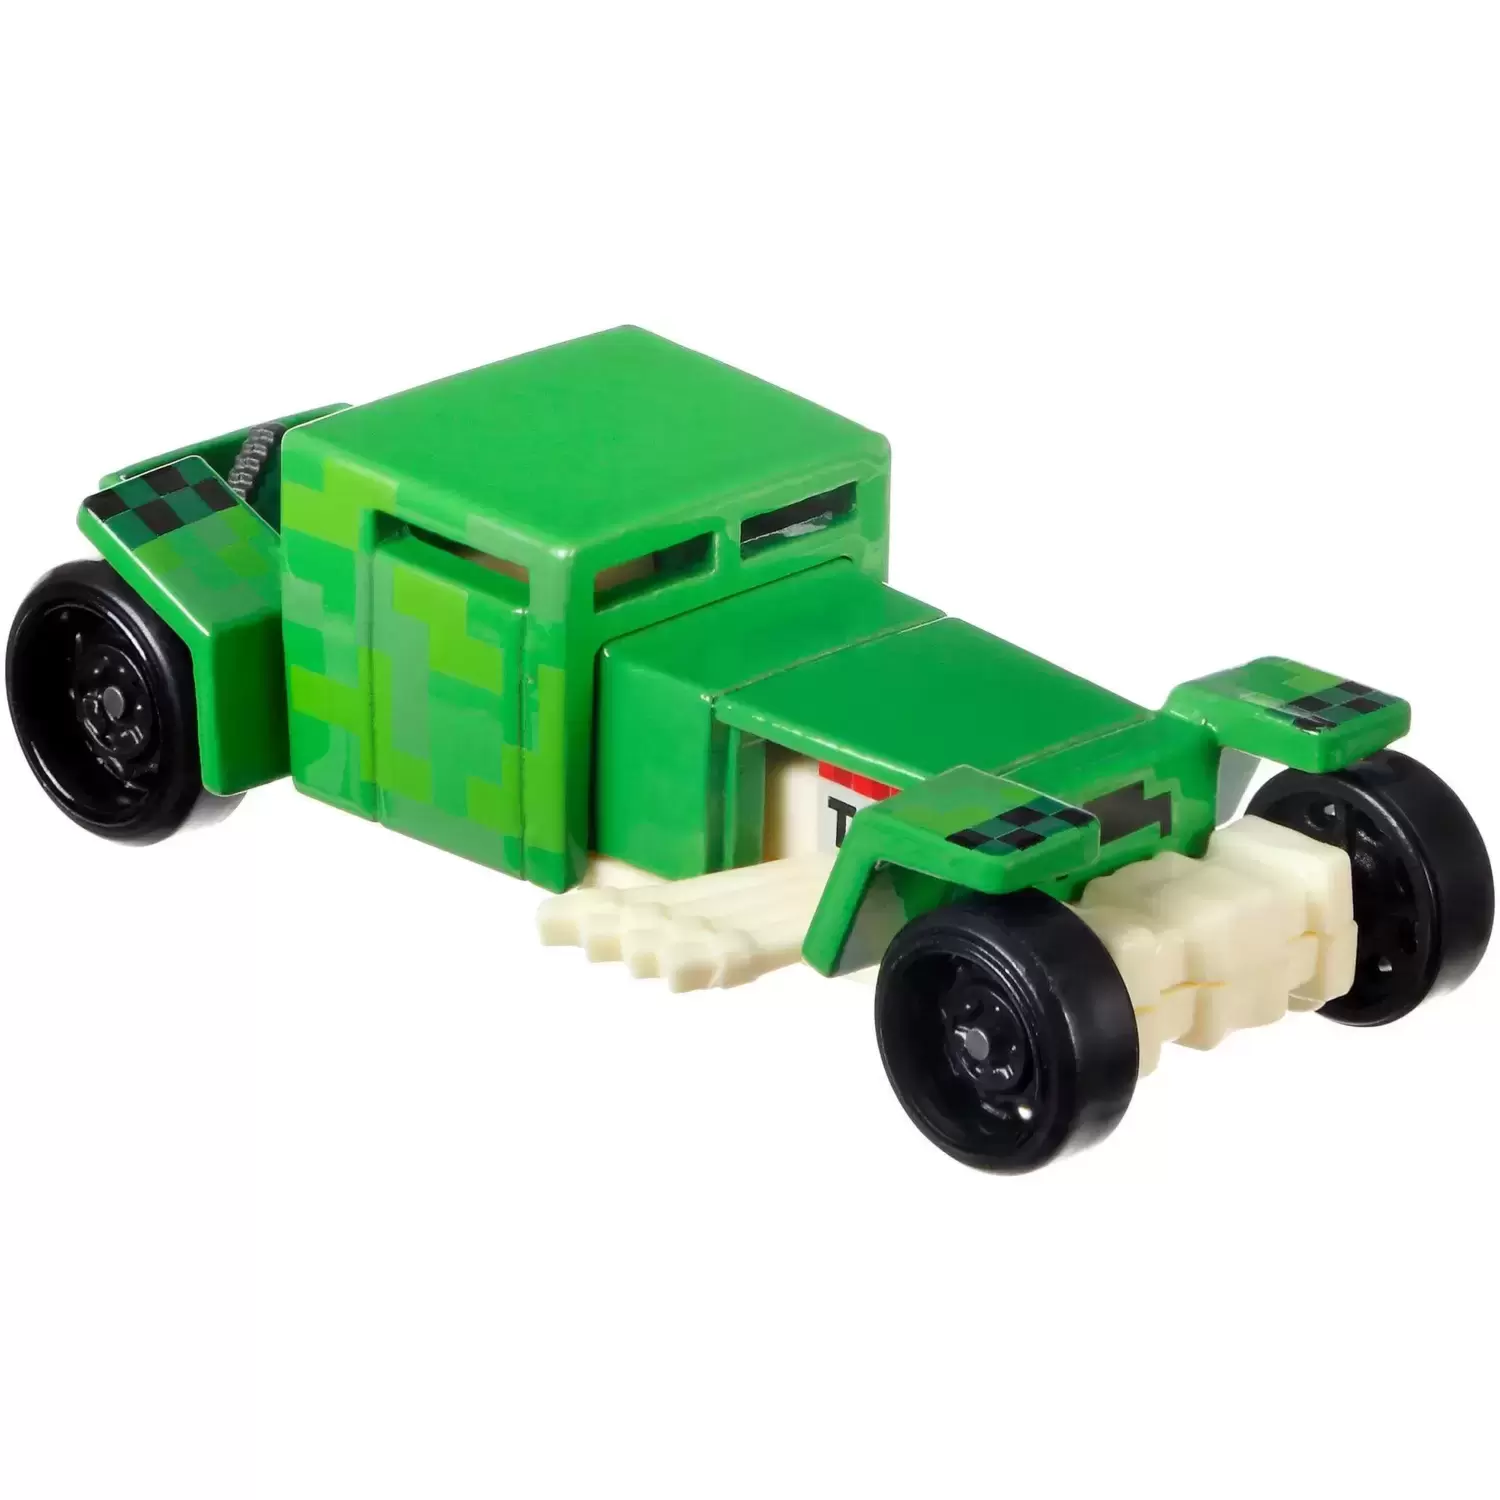 Minecraft Character Cars - Creeper